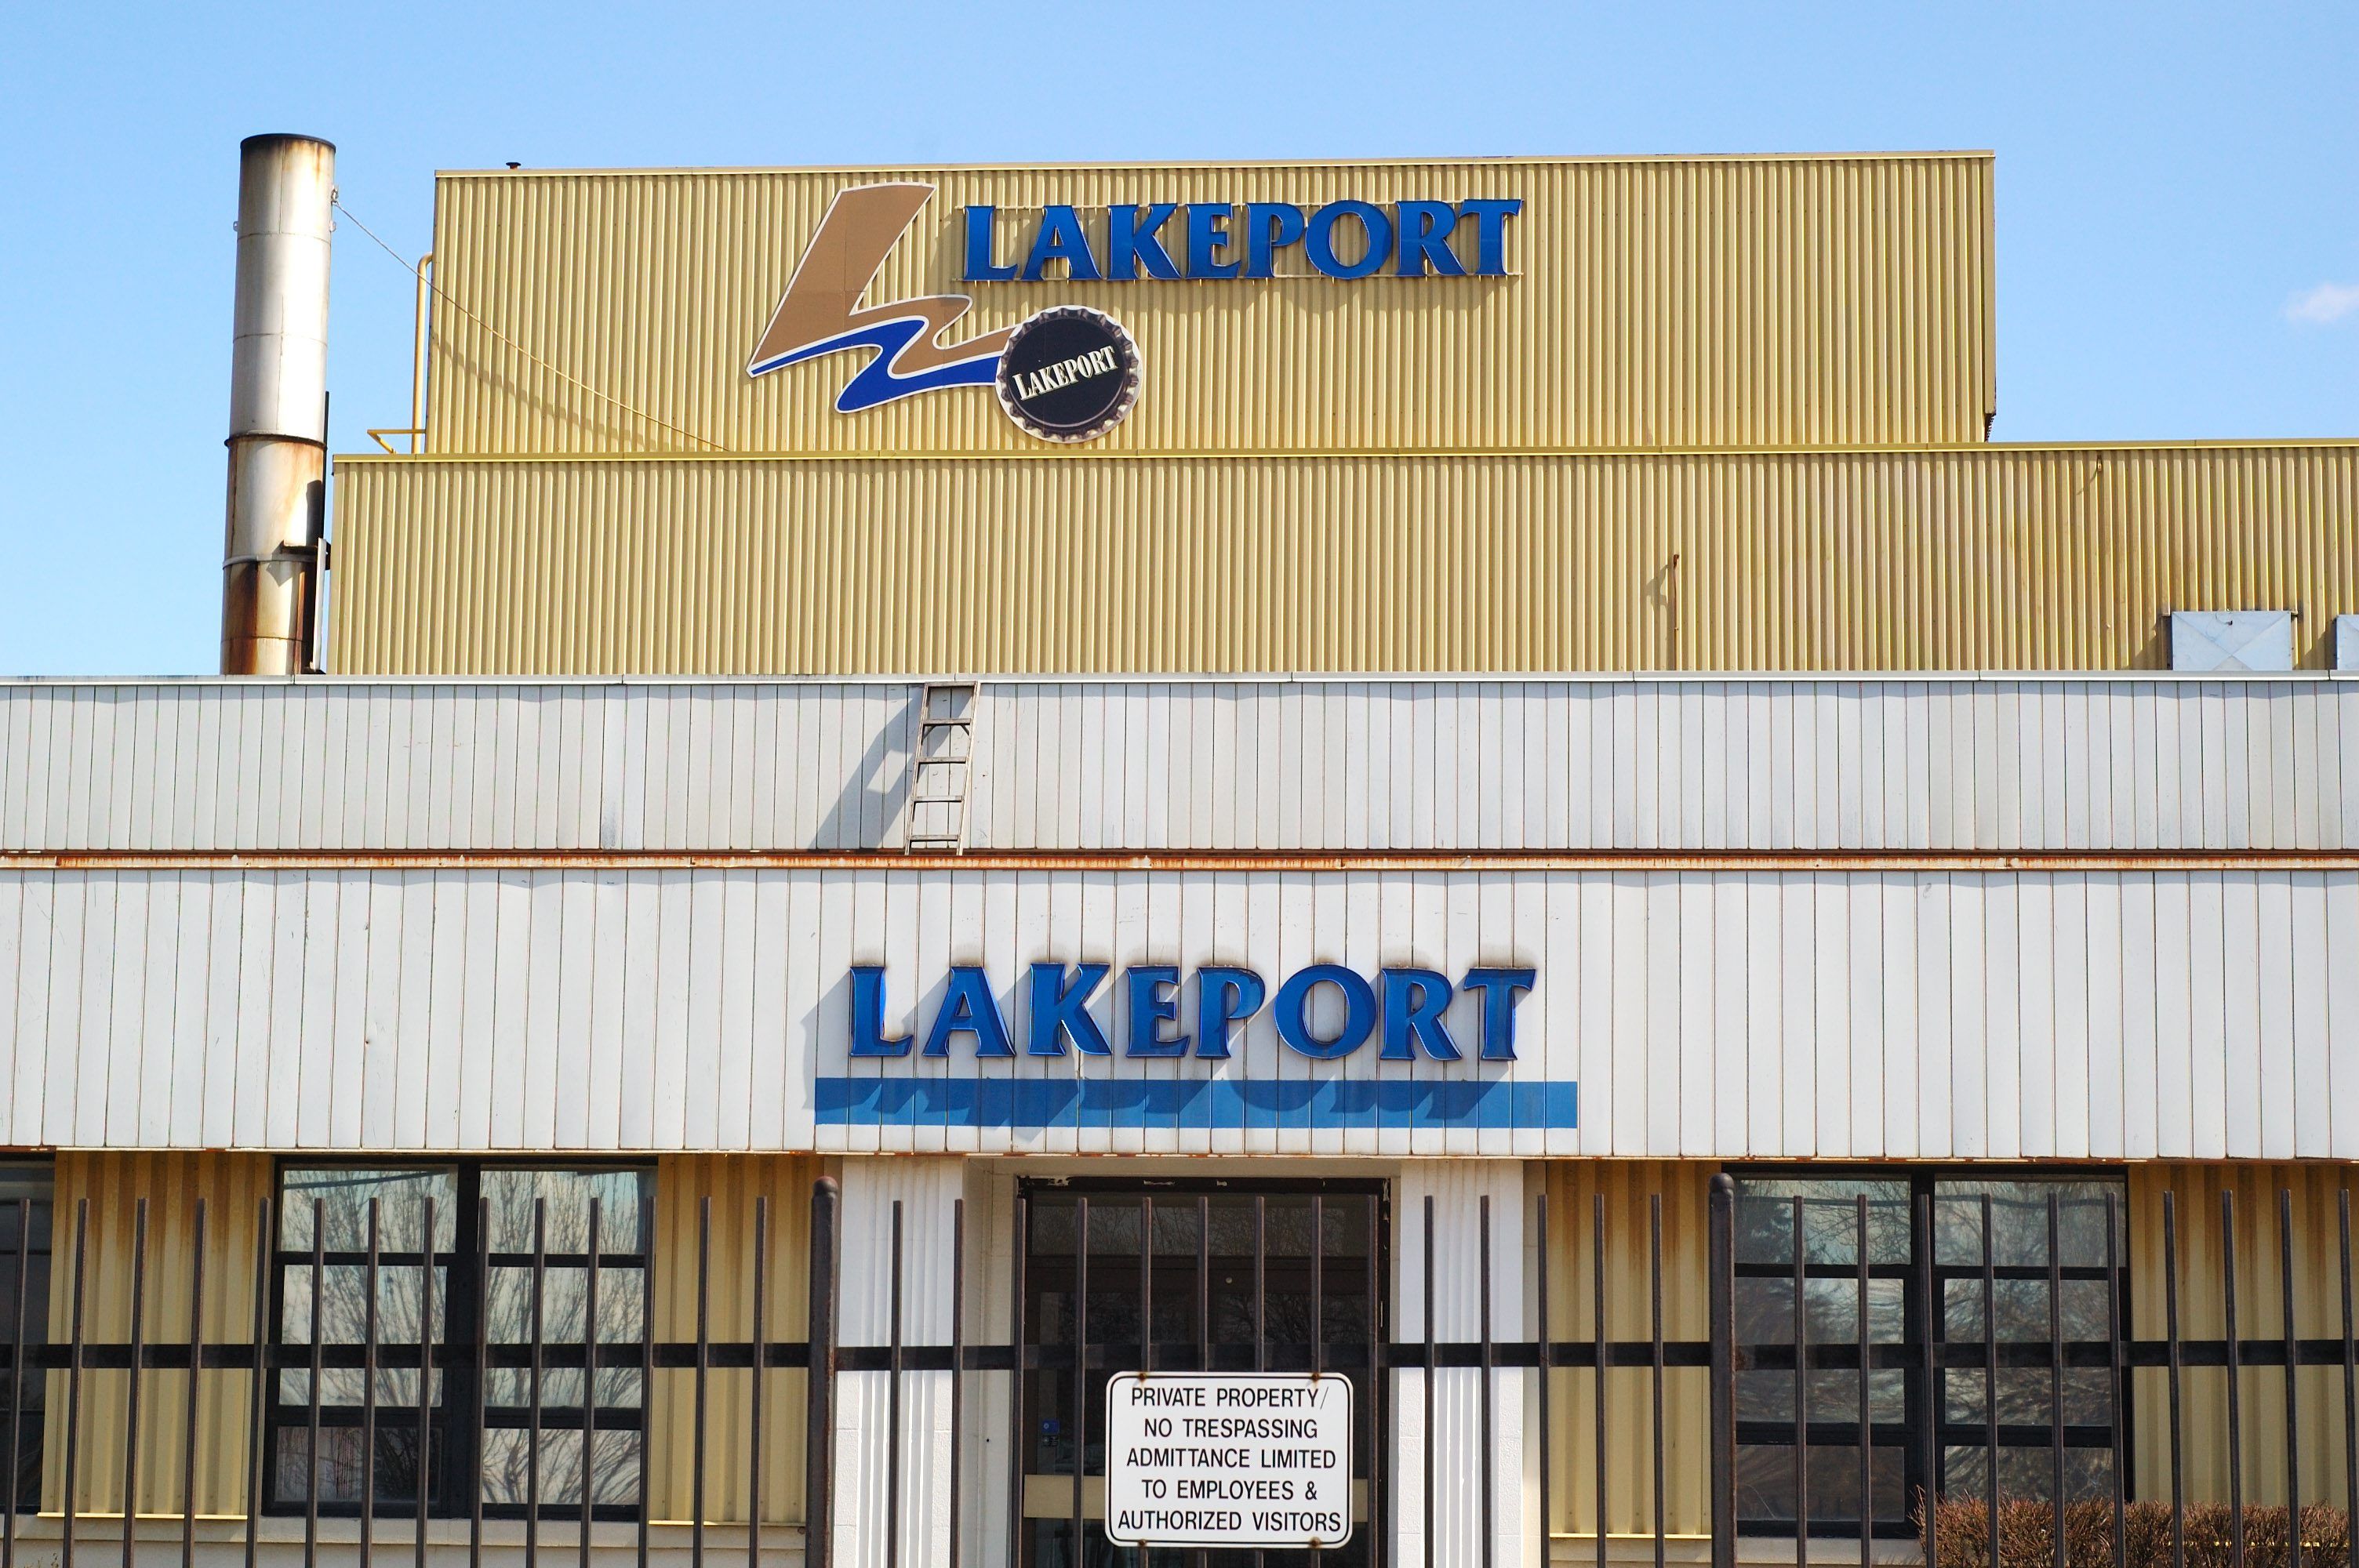 Lakeport brewery and head office in Hamilton, Ontario